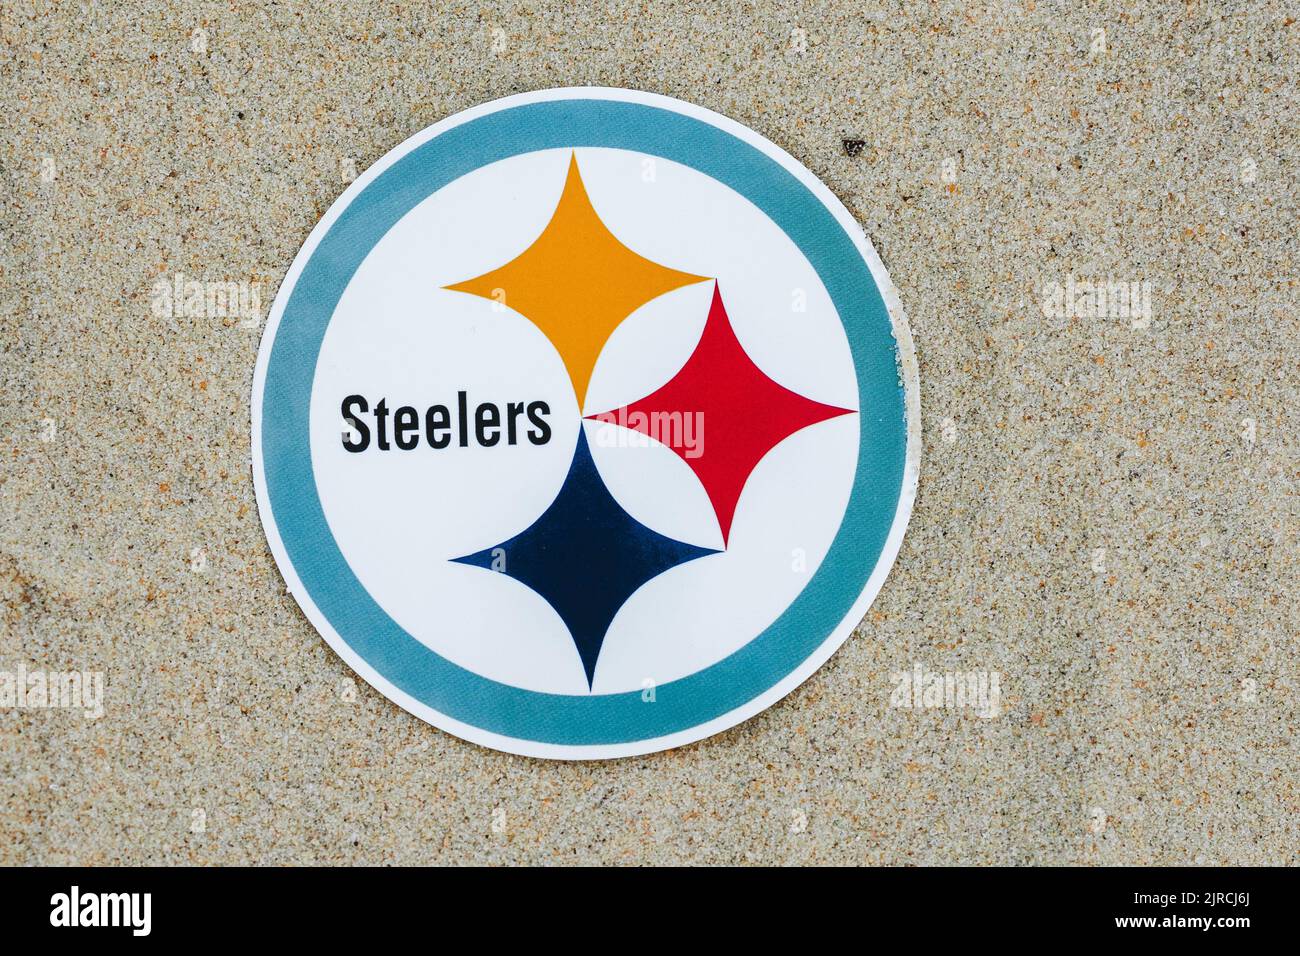 September 15, 2021, Moscow, Russia. The emblem of the Pittsburgh Steelers football club on the sand of the beach. Stock Photo